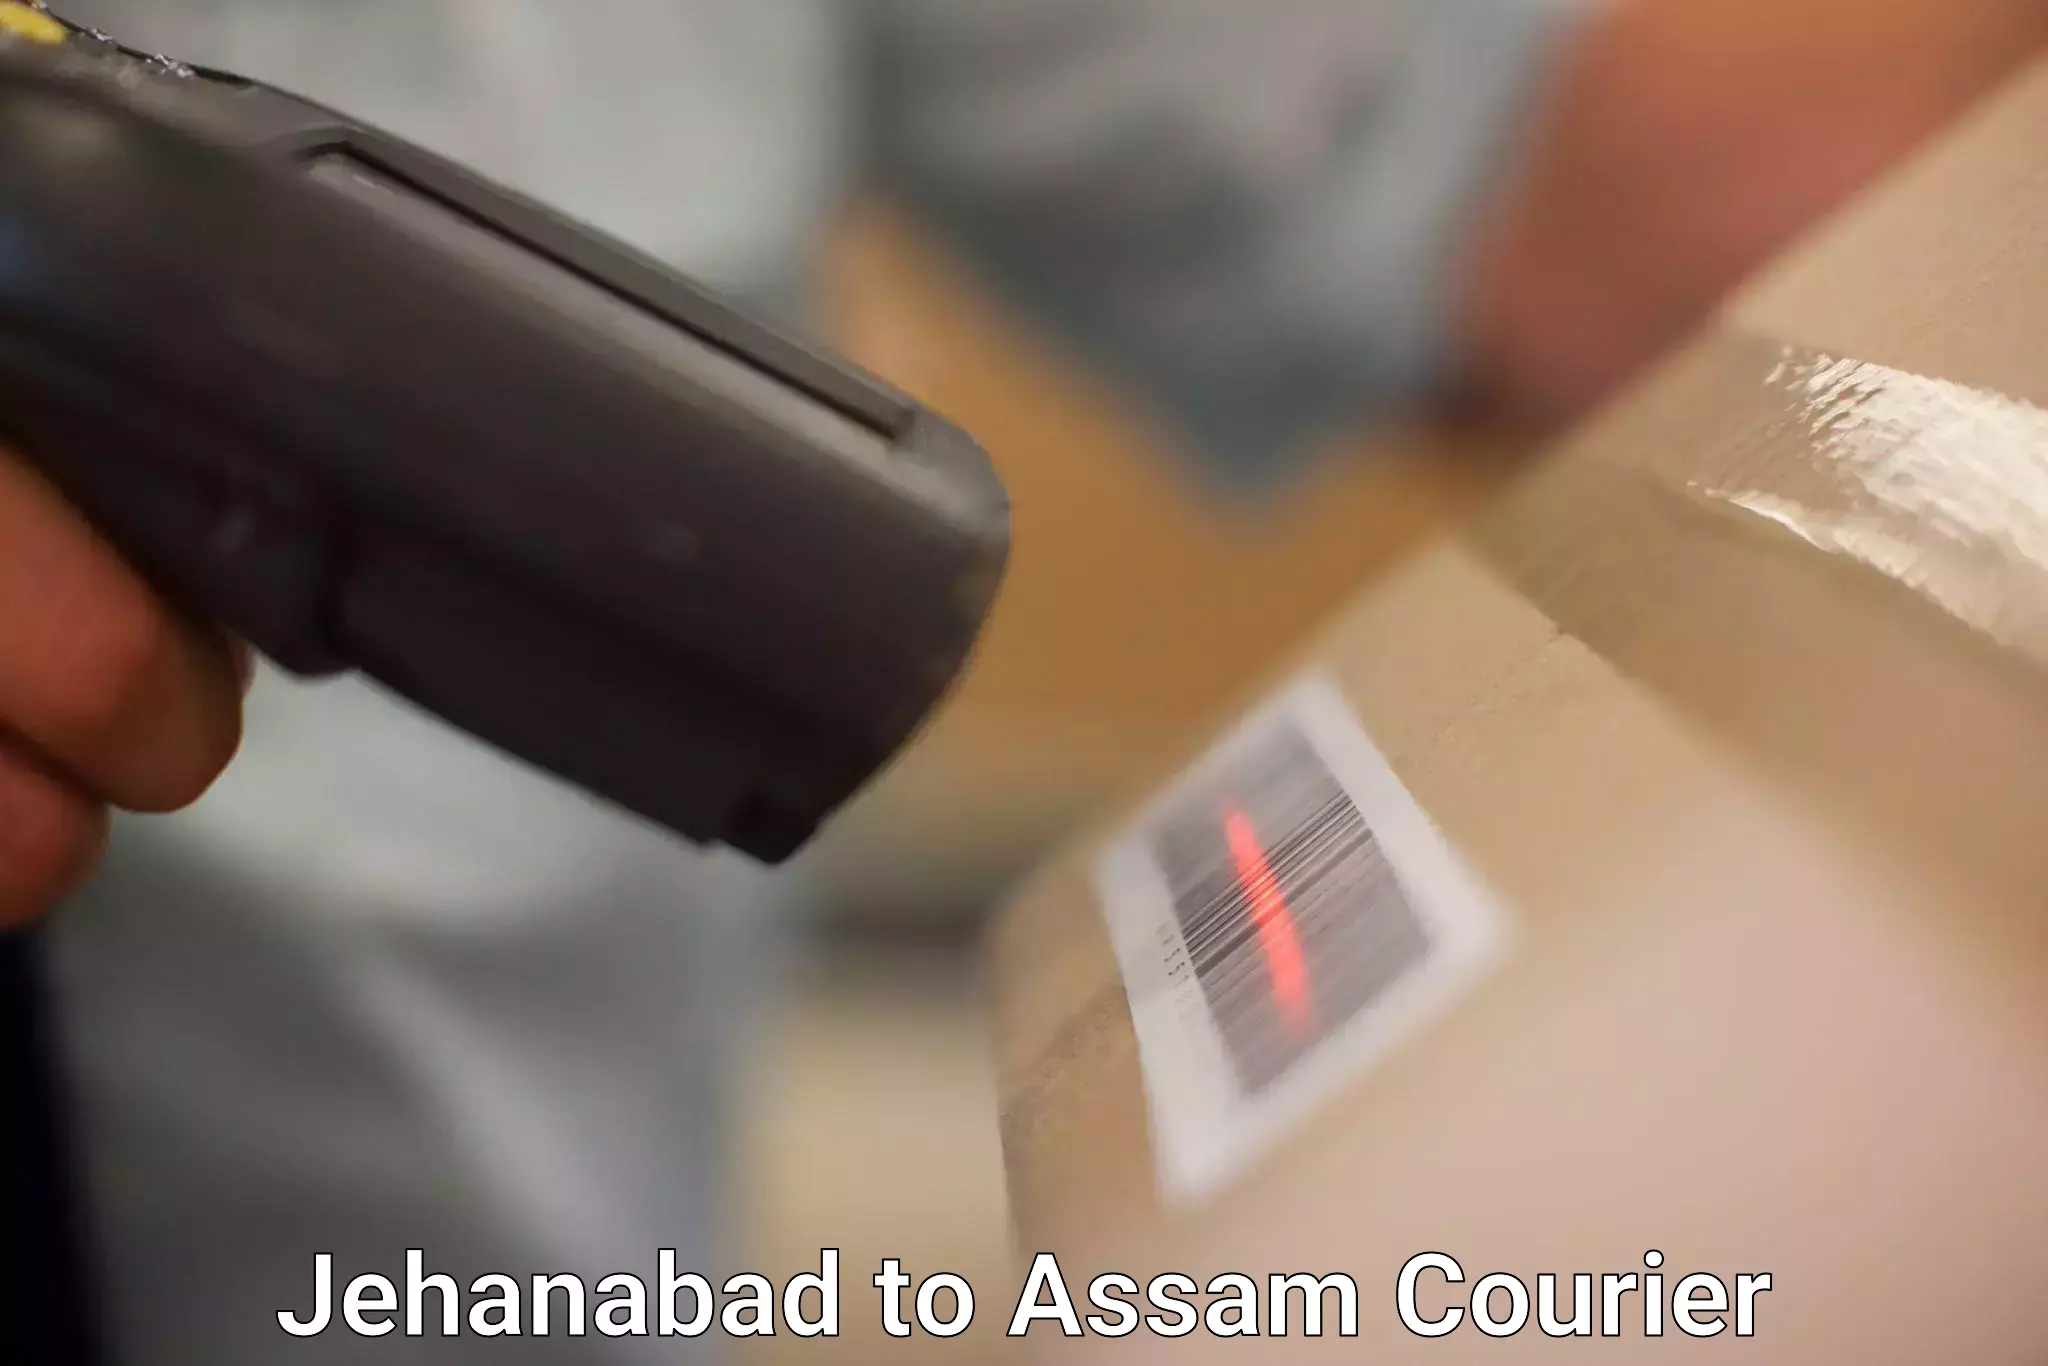 Professional courier handling Jehanabad to Lala Assam